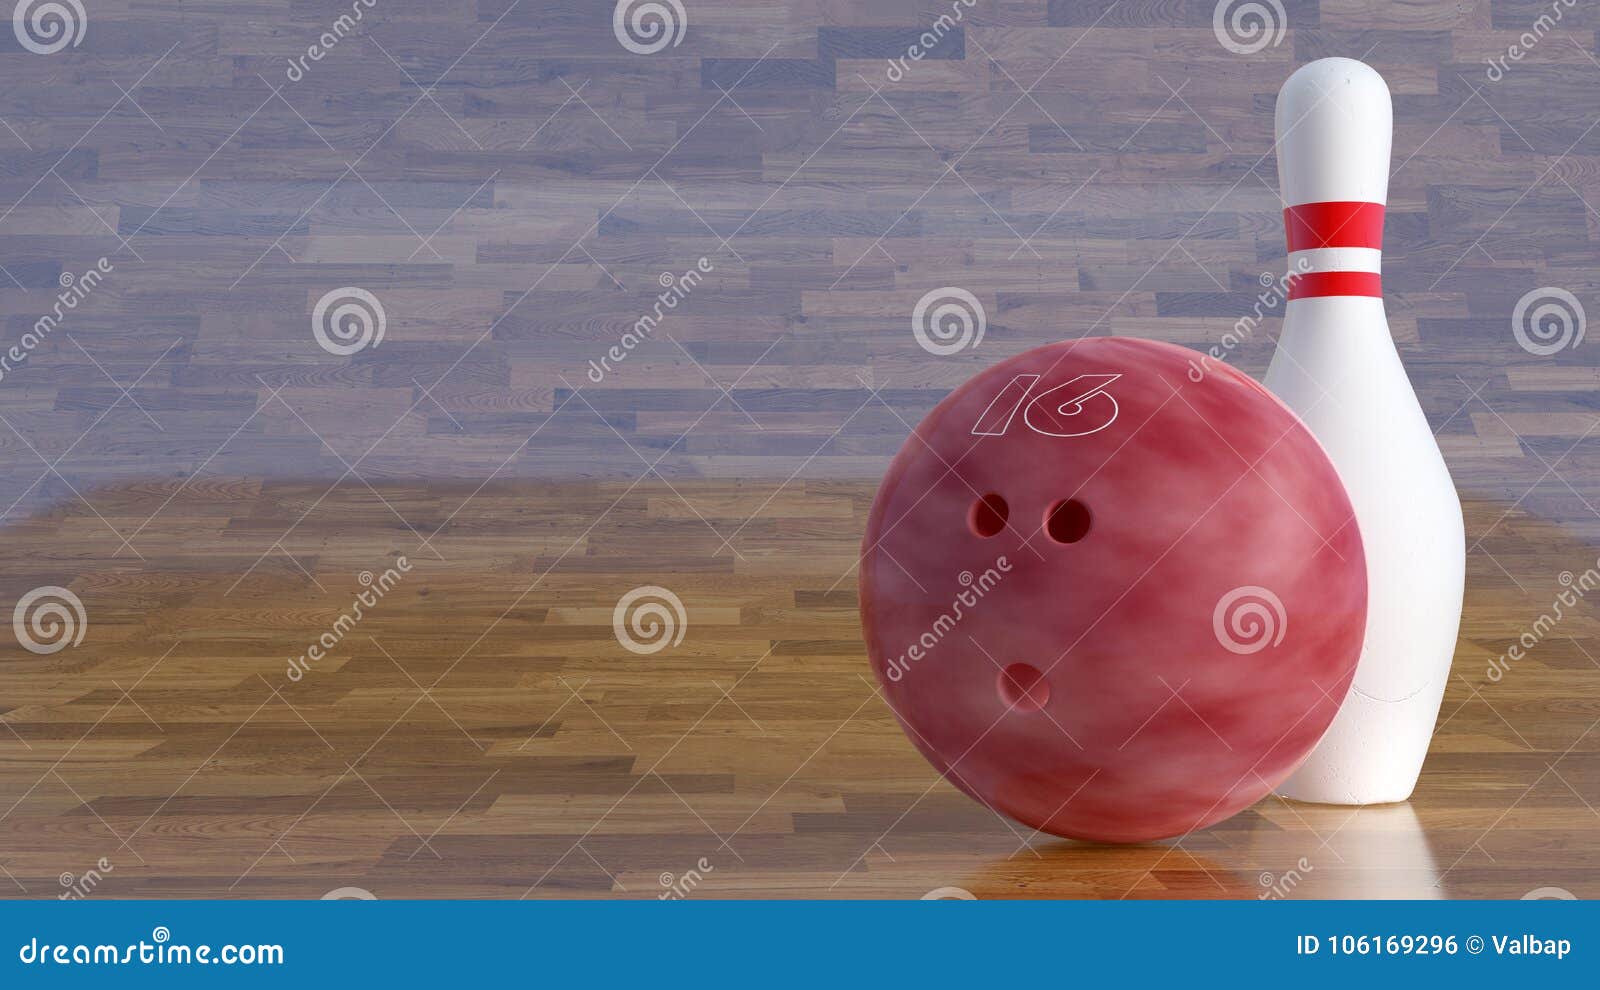 bowling ball number 16 and one pin